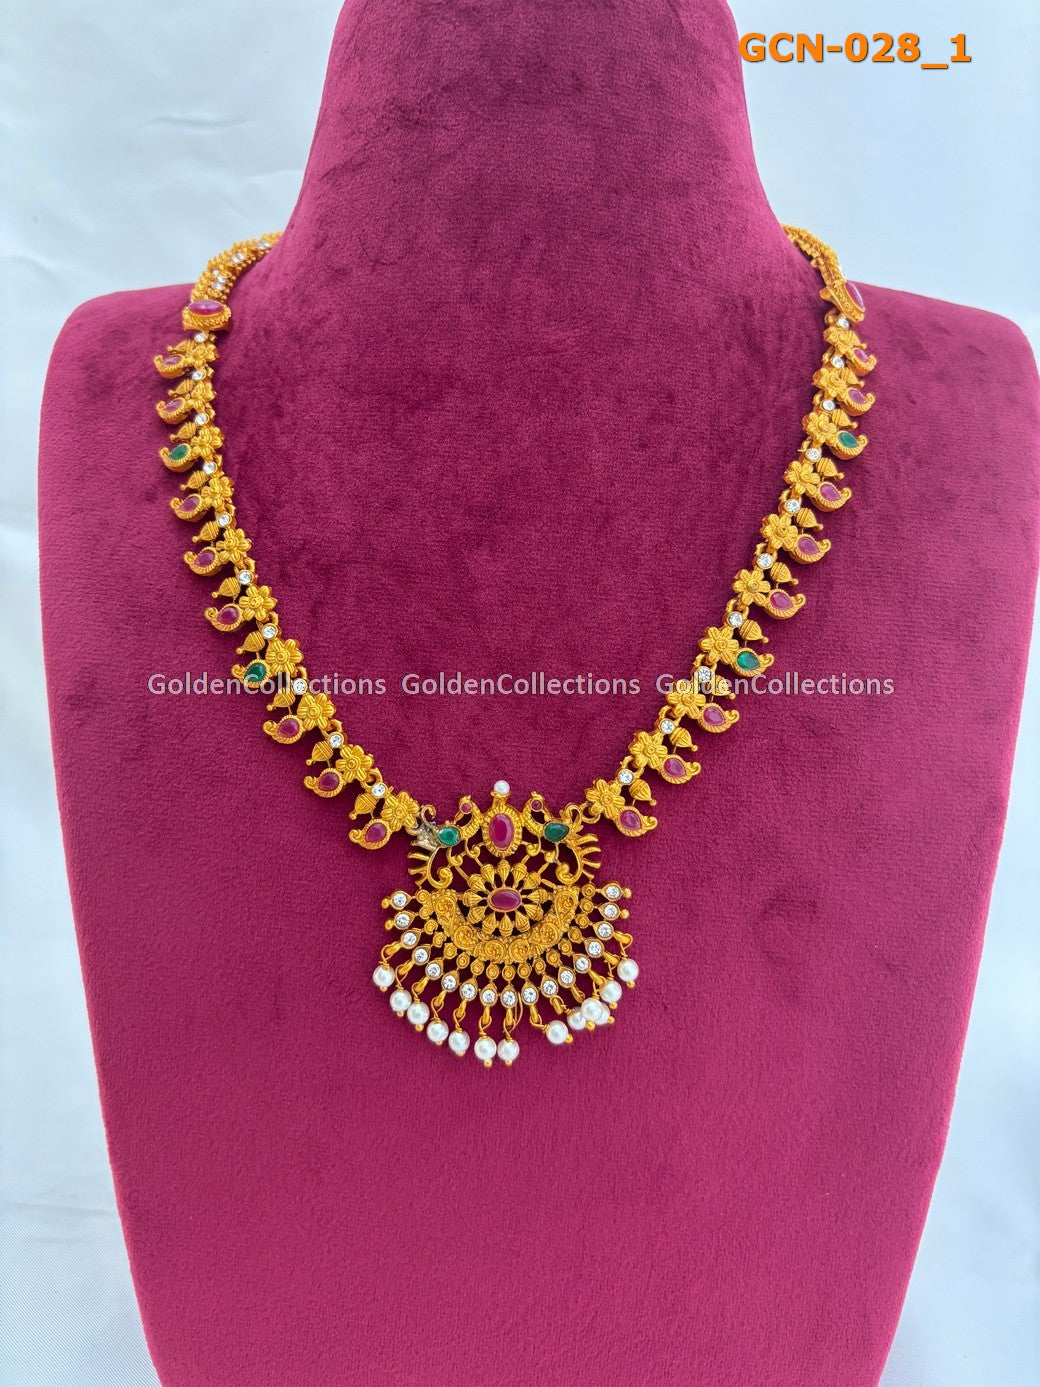 Necklaces For Women : Antique Costume Necklace Golden Collections 2